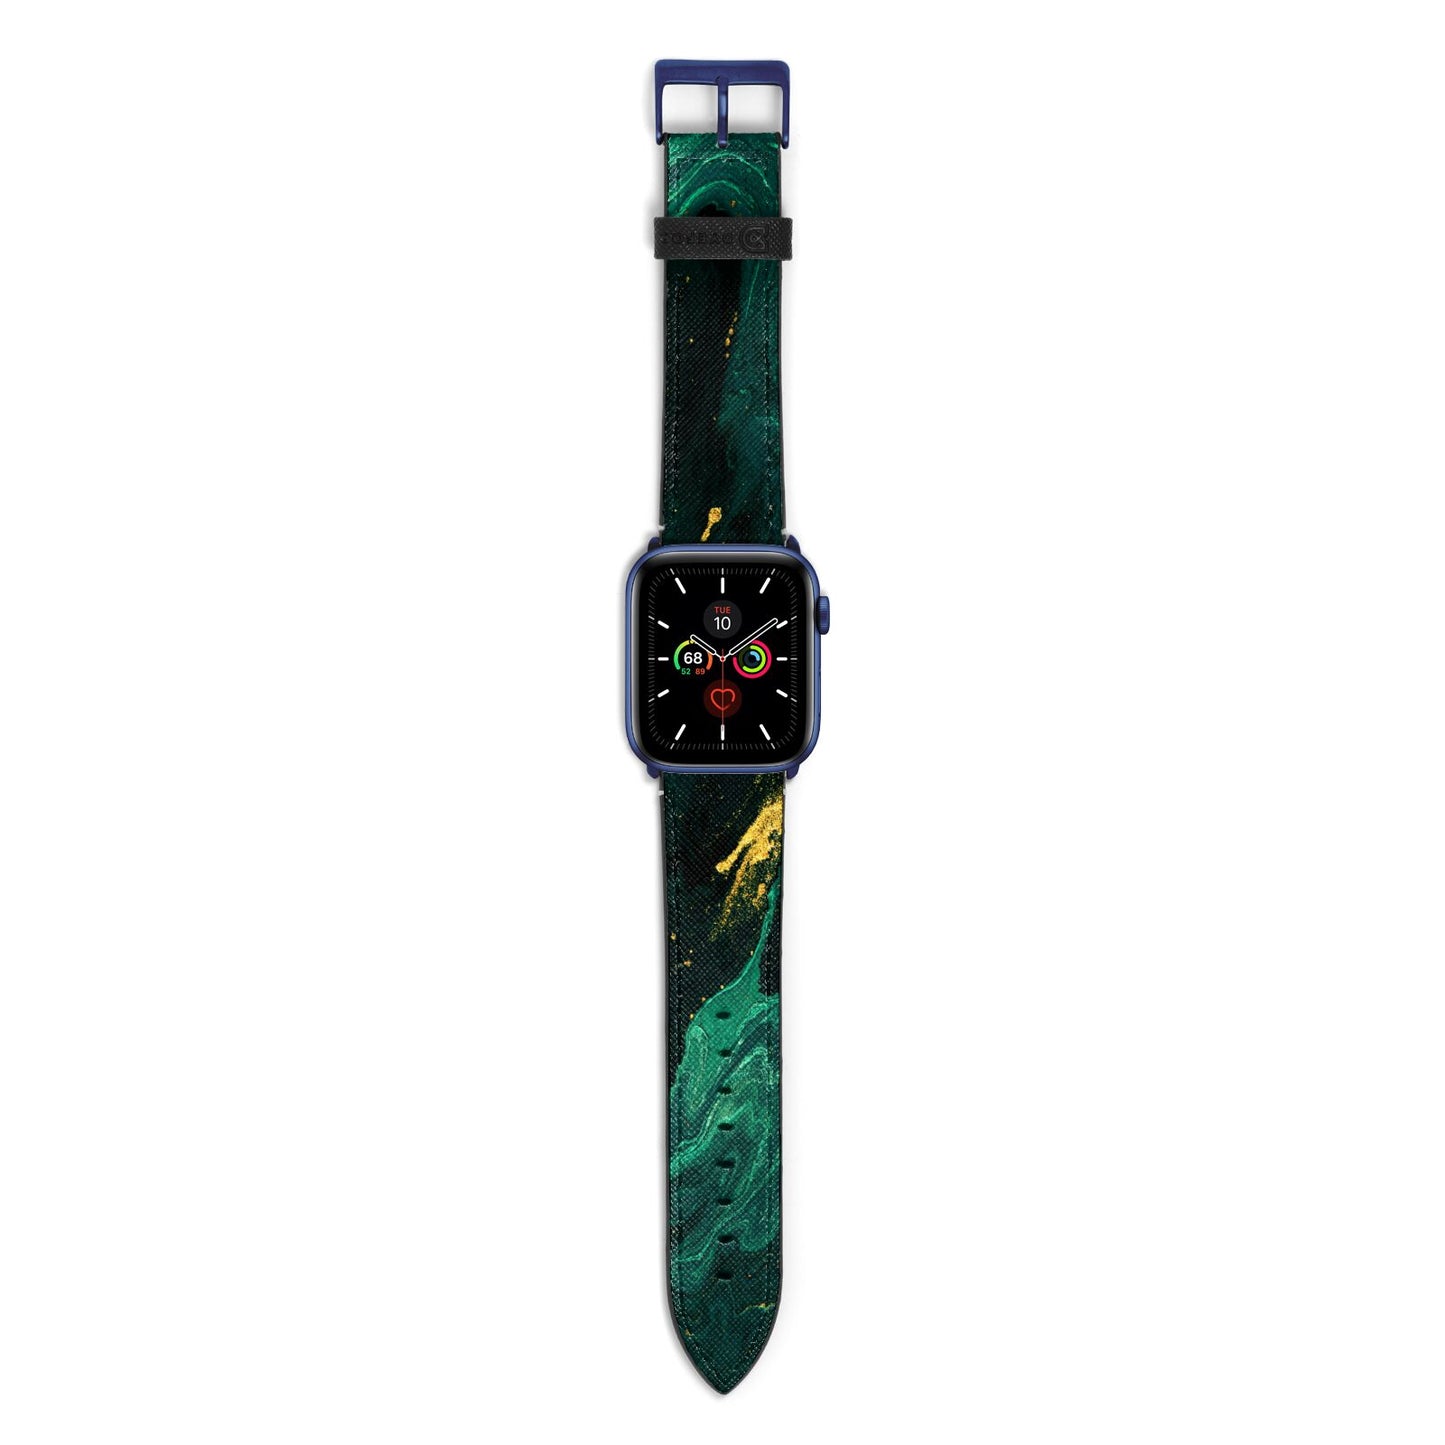 Emerald Green Apple Watch Strap with Blue Hardware